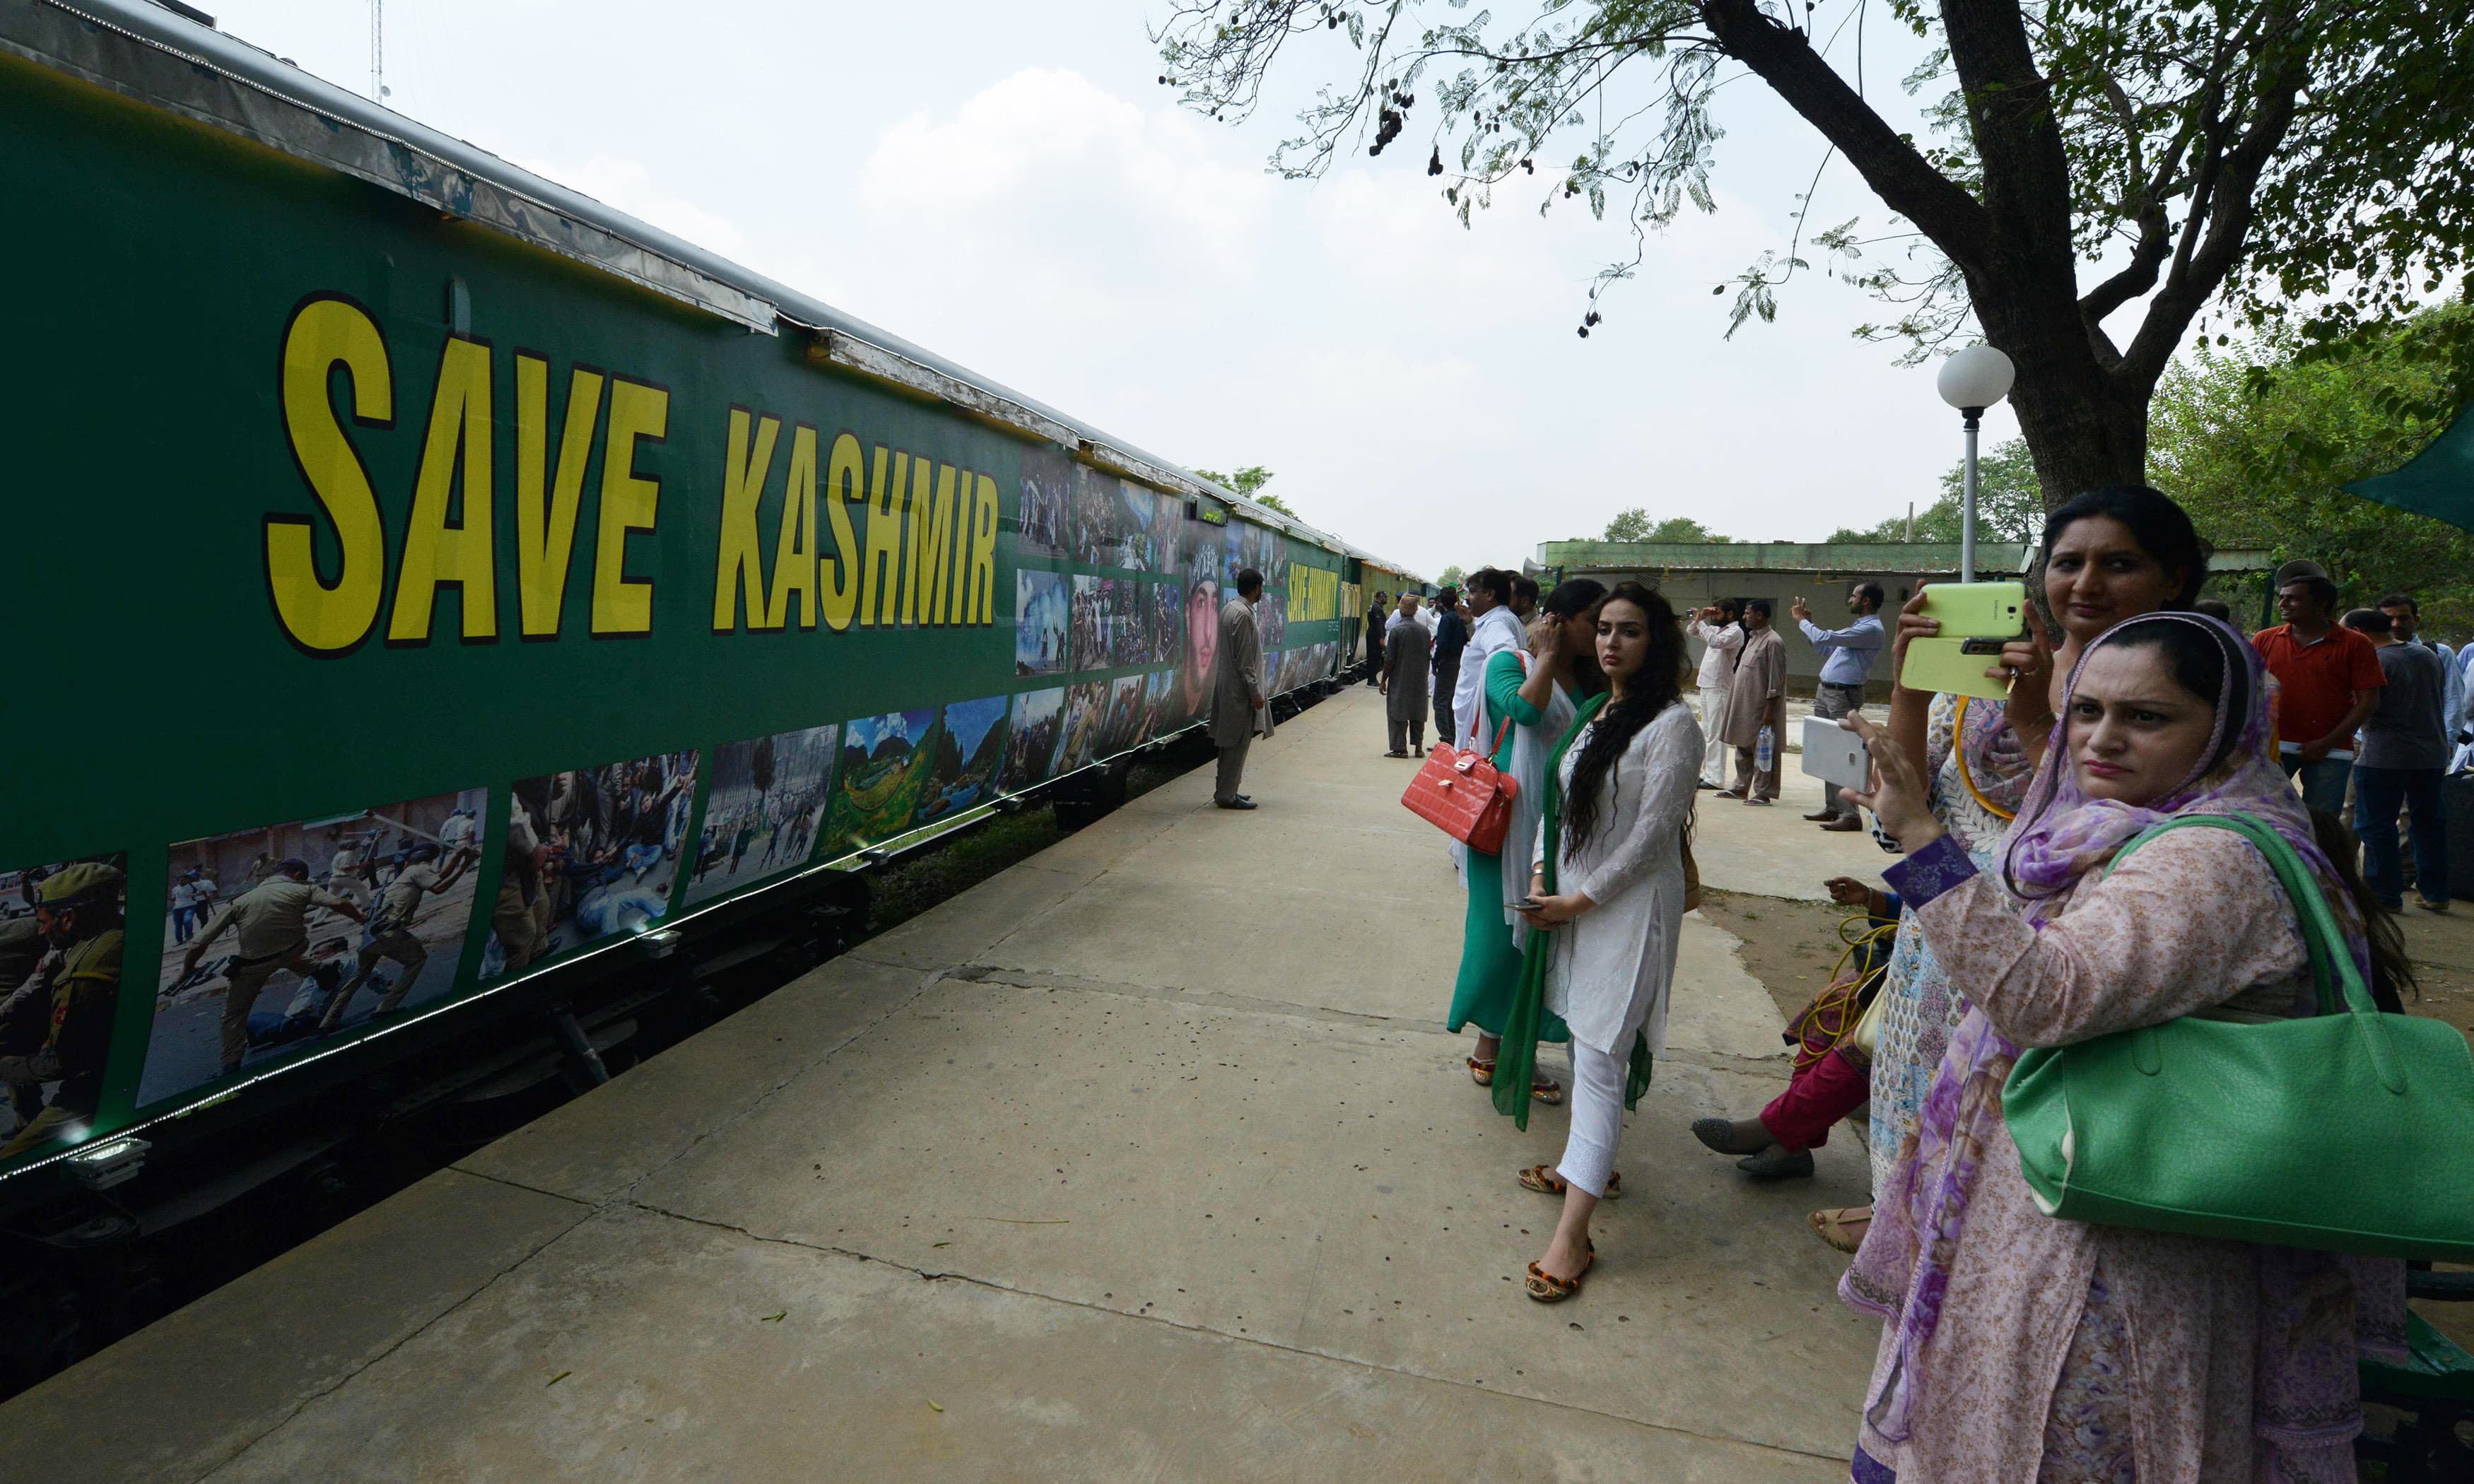 Pakistani residents look as the 'Azadi Train' (Independence Train) prepares to start its journey at Margalla Railway Station in Islamabad on August 11, 2016, ahead of Pakistan Independence Day celebrations. The train consists of coaches representing the culture and traditions of all four provinces of Pakistan and Pakistan-administered Kashmir and is scheduled to cover some 4,000 kms in a journey of a month which will culminate in the port city of Karachi. Pakistan celebrates the 69th anniversary of the country's independence from British rule on August 14. / AFP PHOTO / AAMIR QURESHI